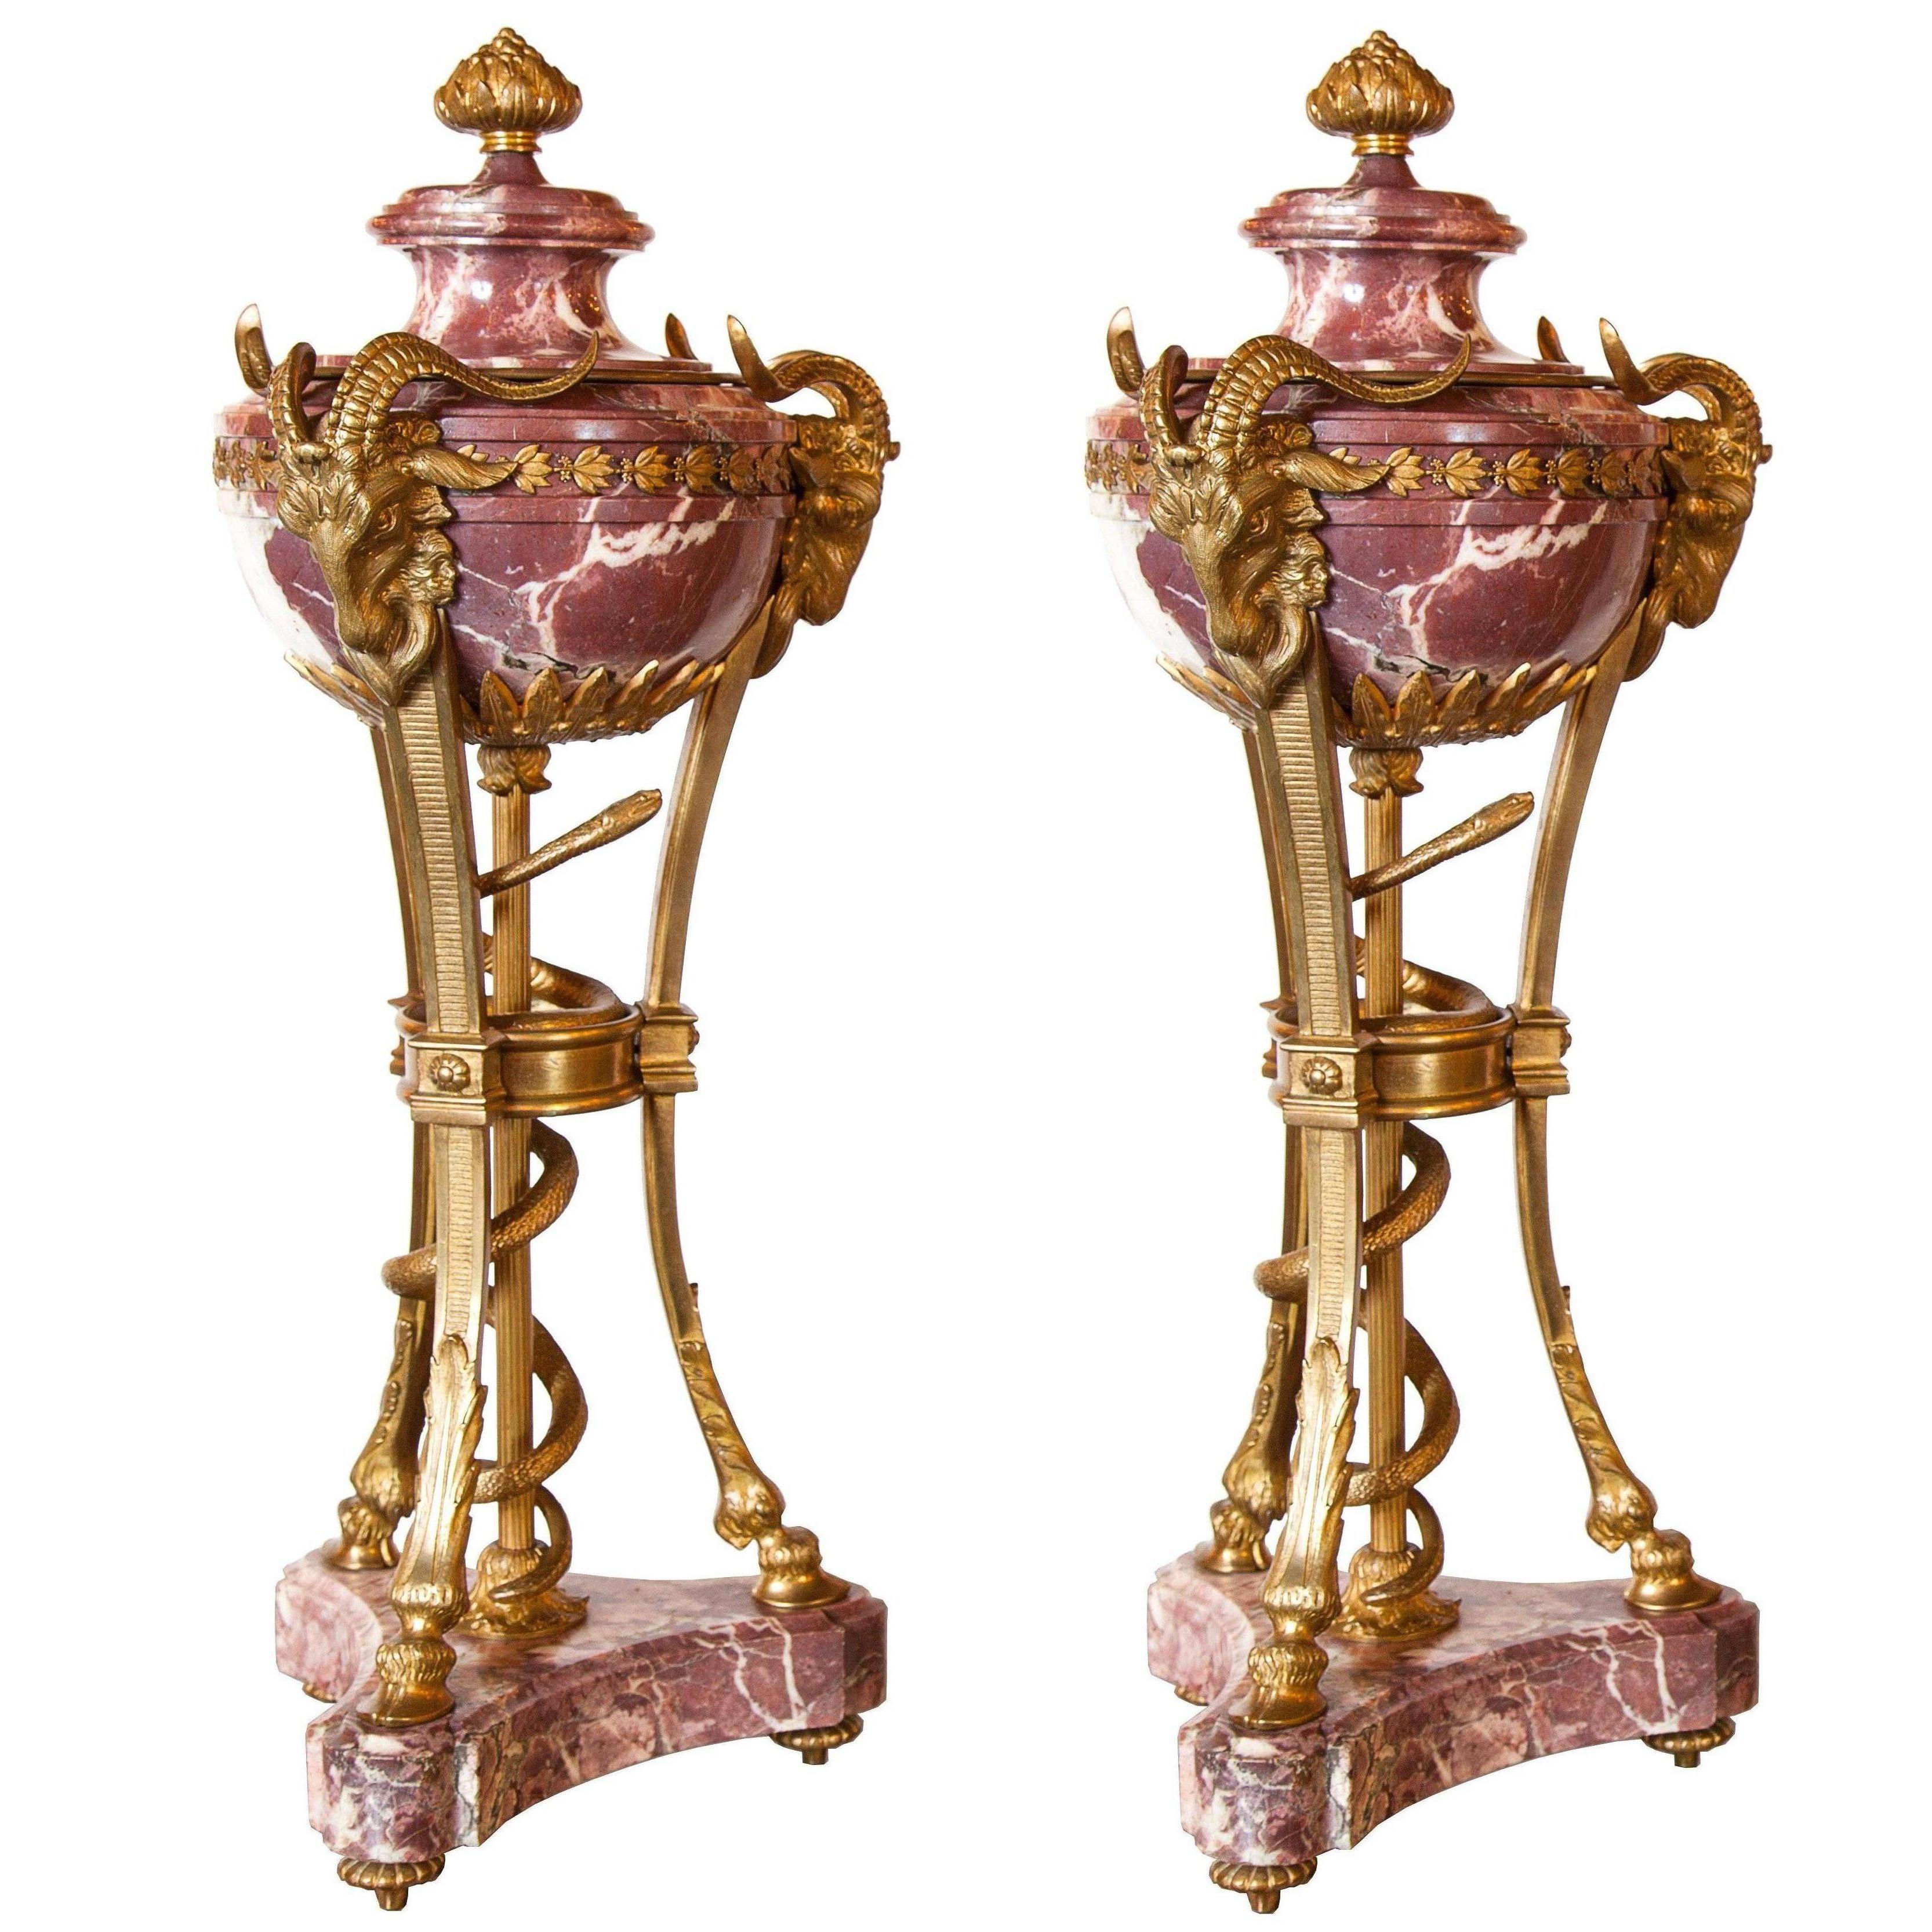 Pair of Gilt Bronze and Rouge Marble Cassolettes